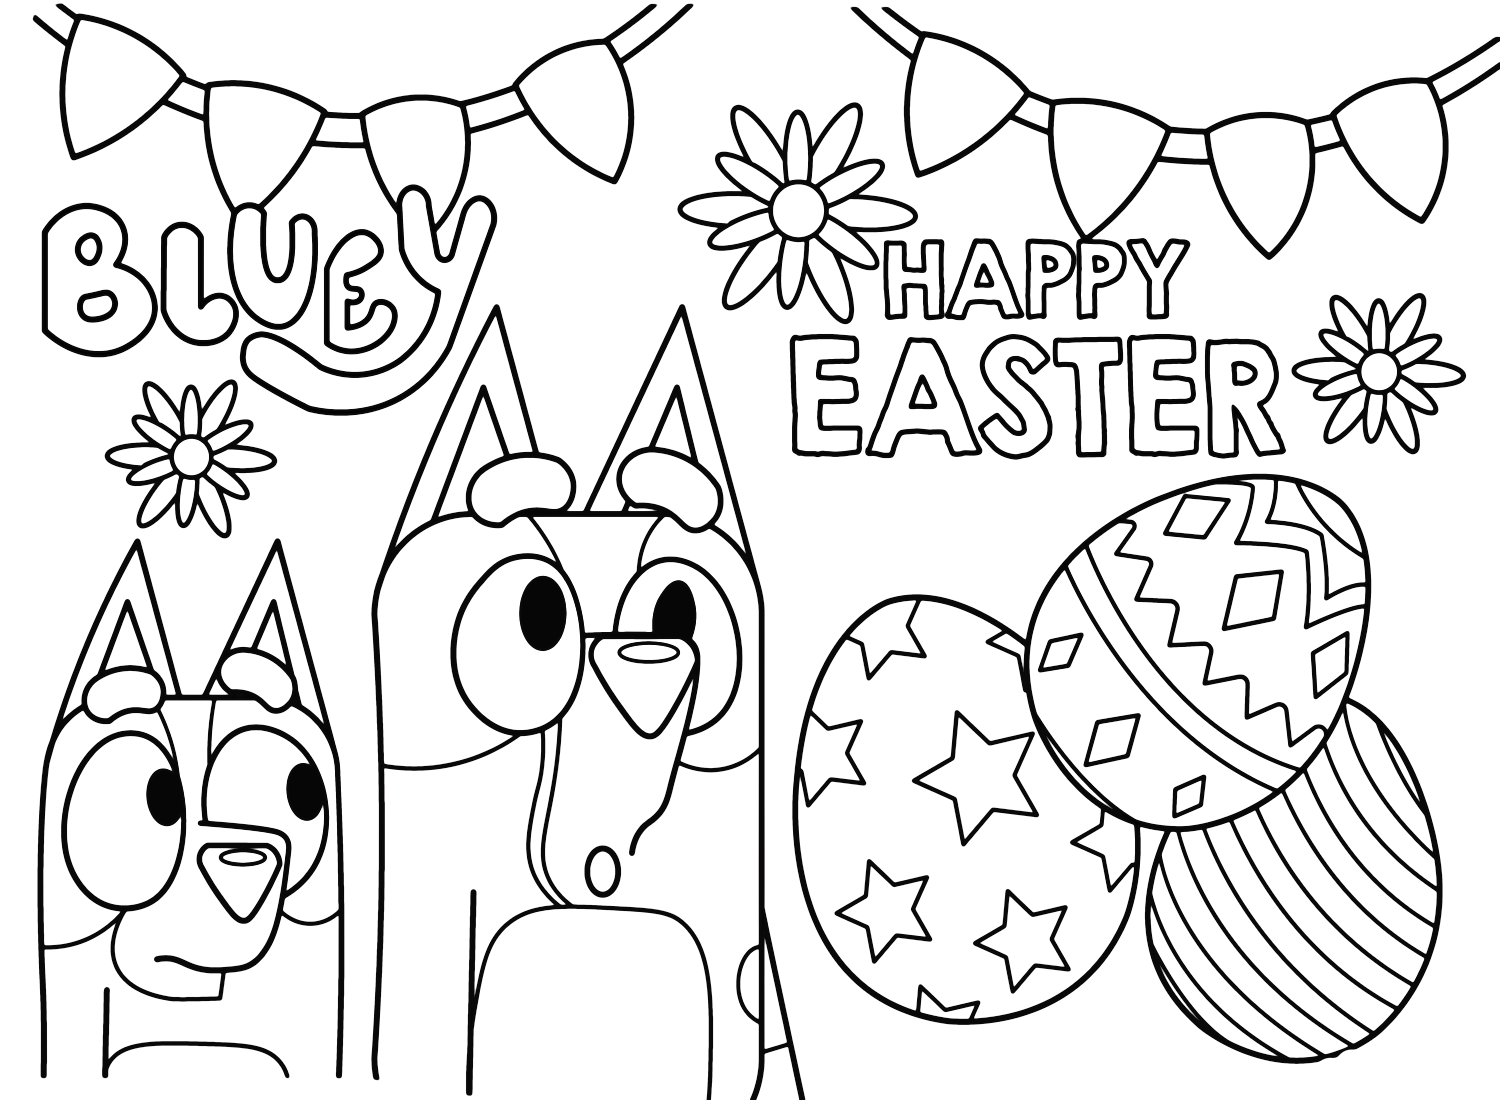 Printable Bluey Coloring Pages from Bluey